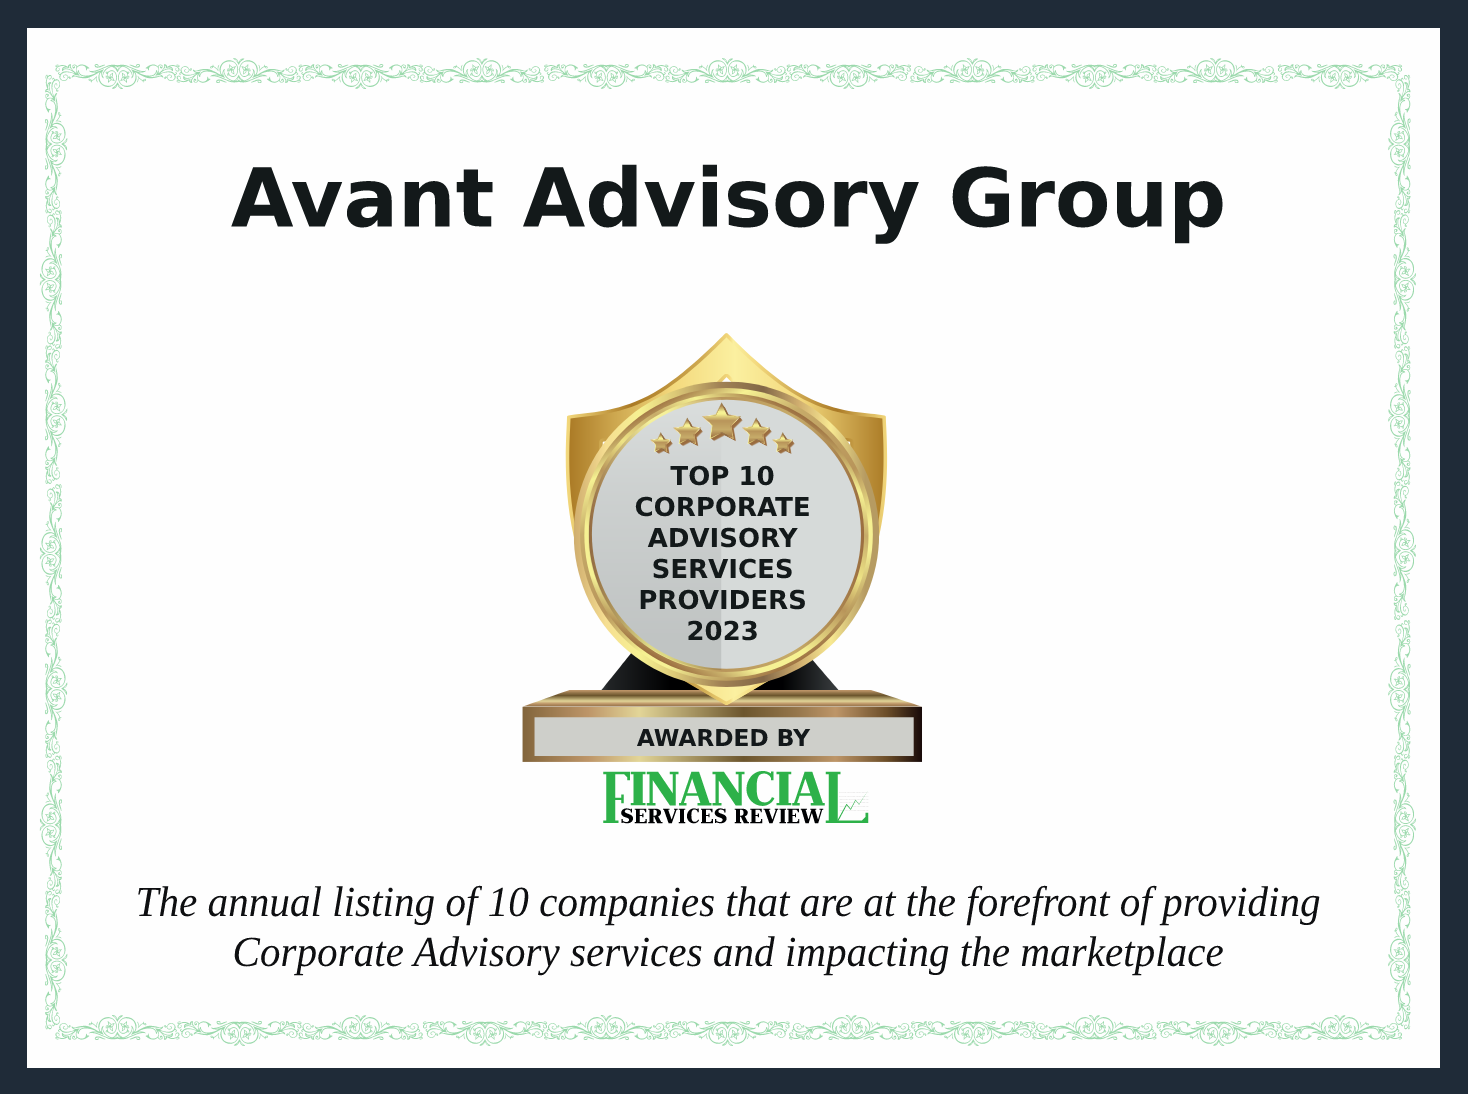 Avant Advisory Group Featured as a 2023 Top 10 Corporate Advisory Services Firm